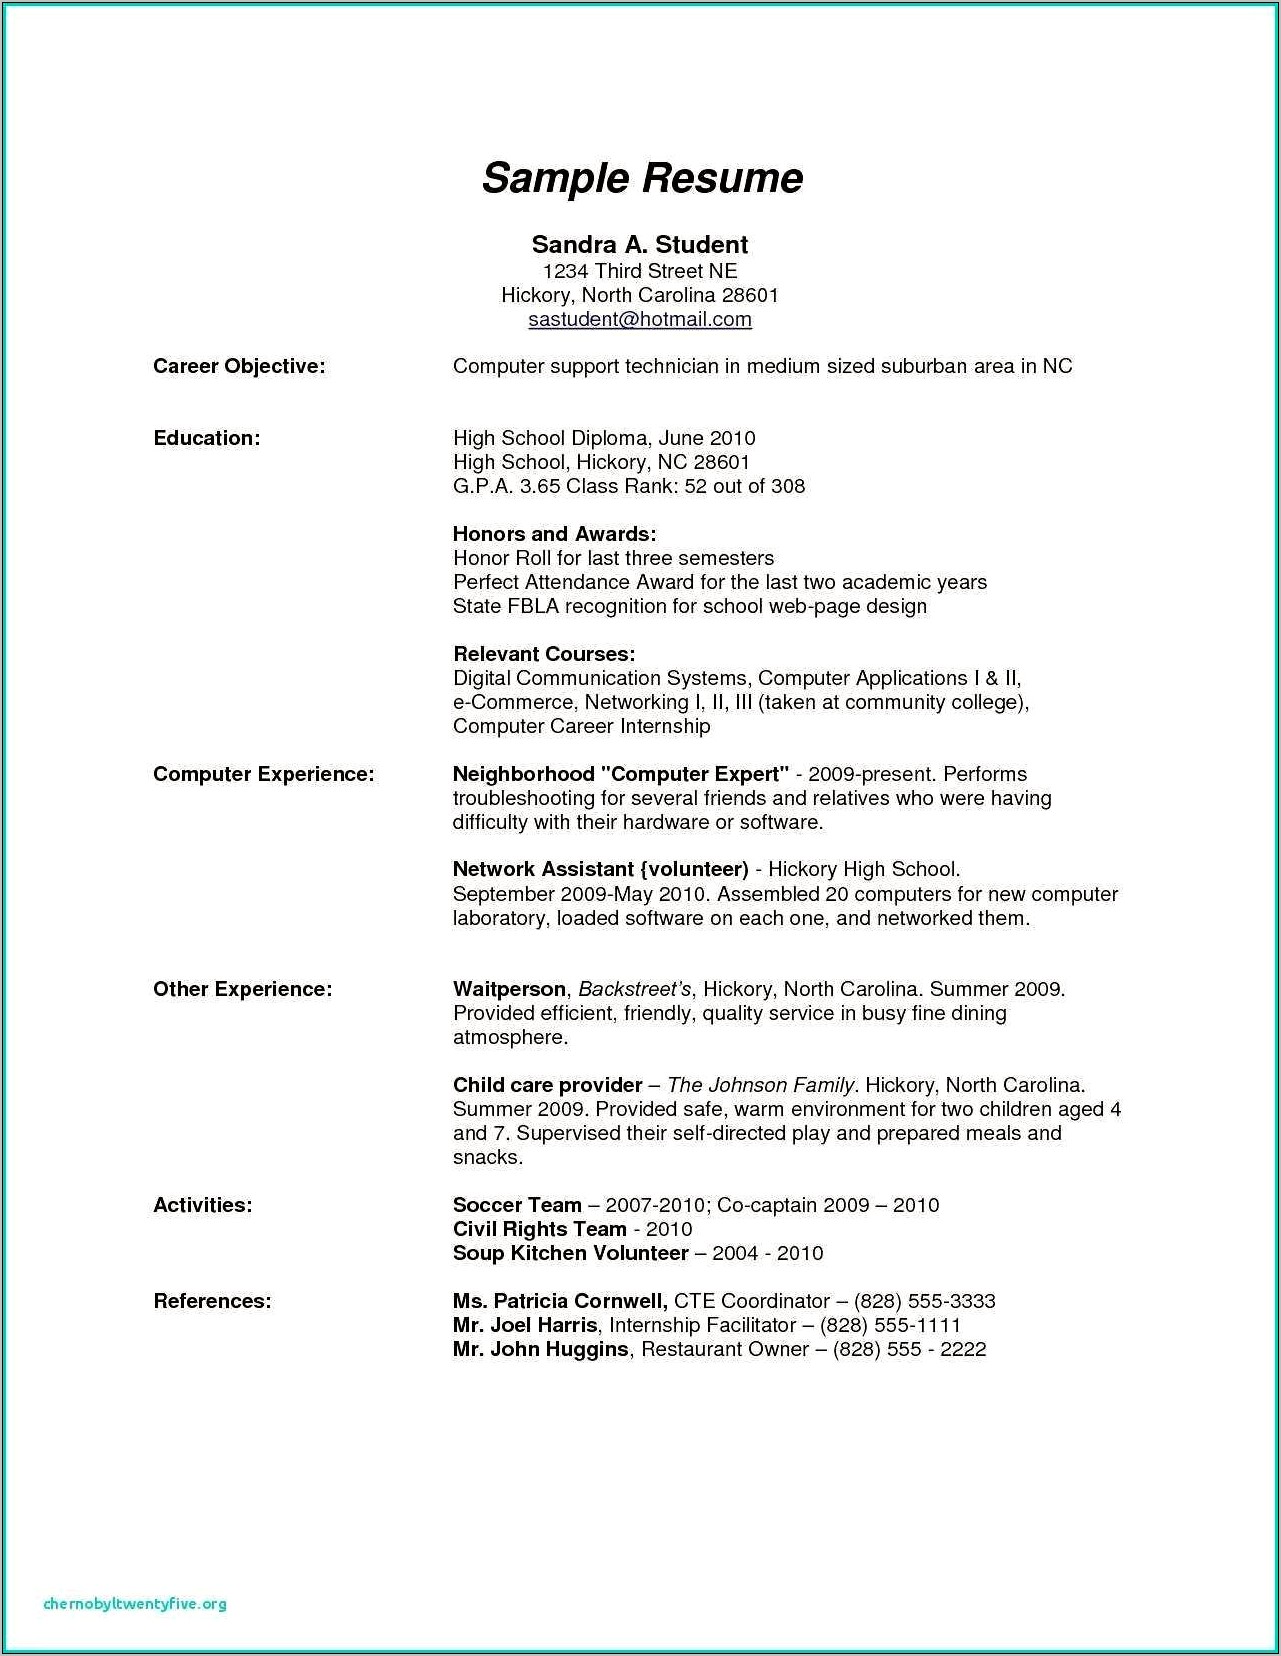 Resume Examples Without High School Diploma